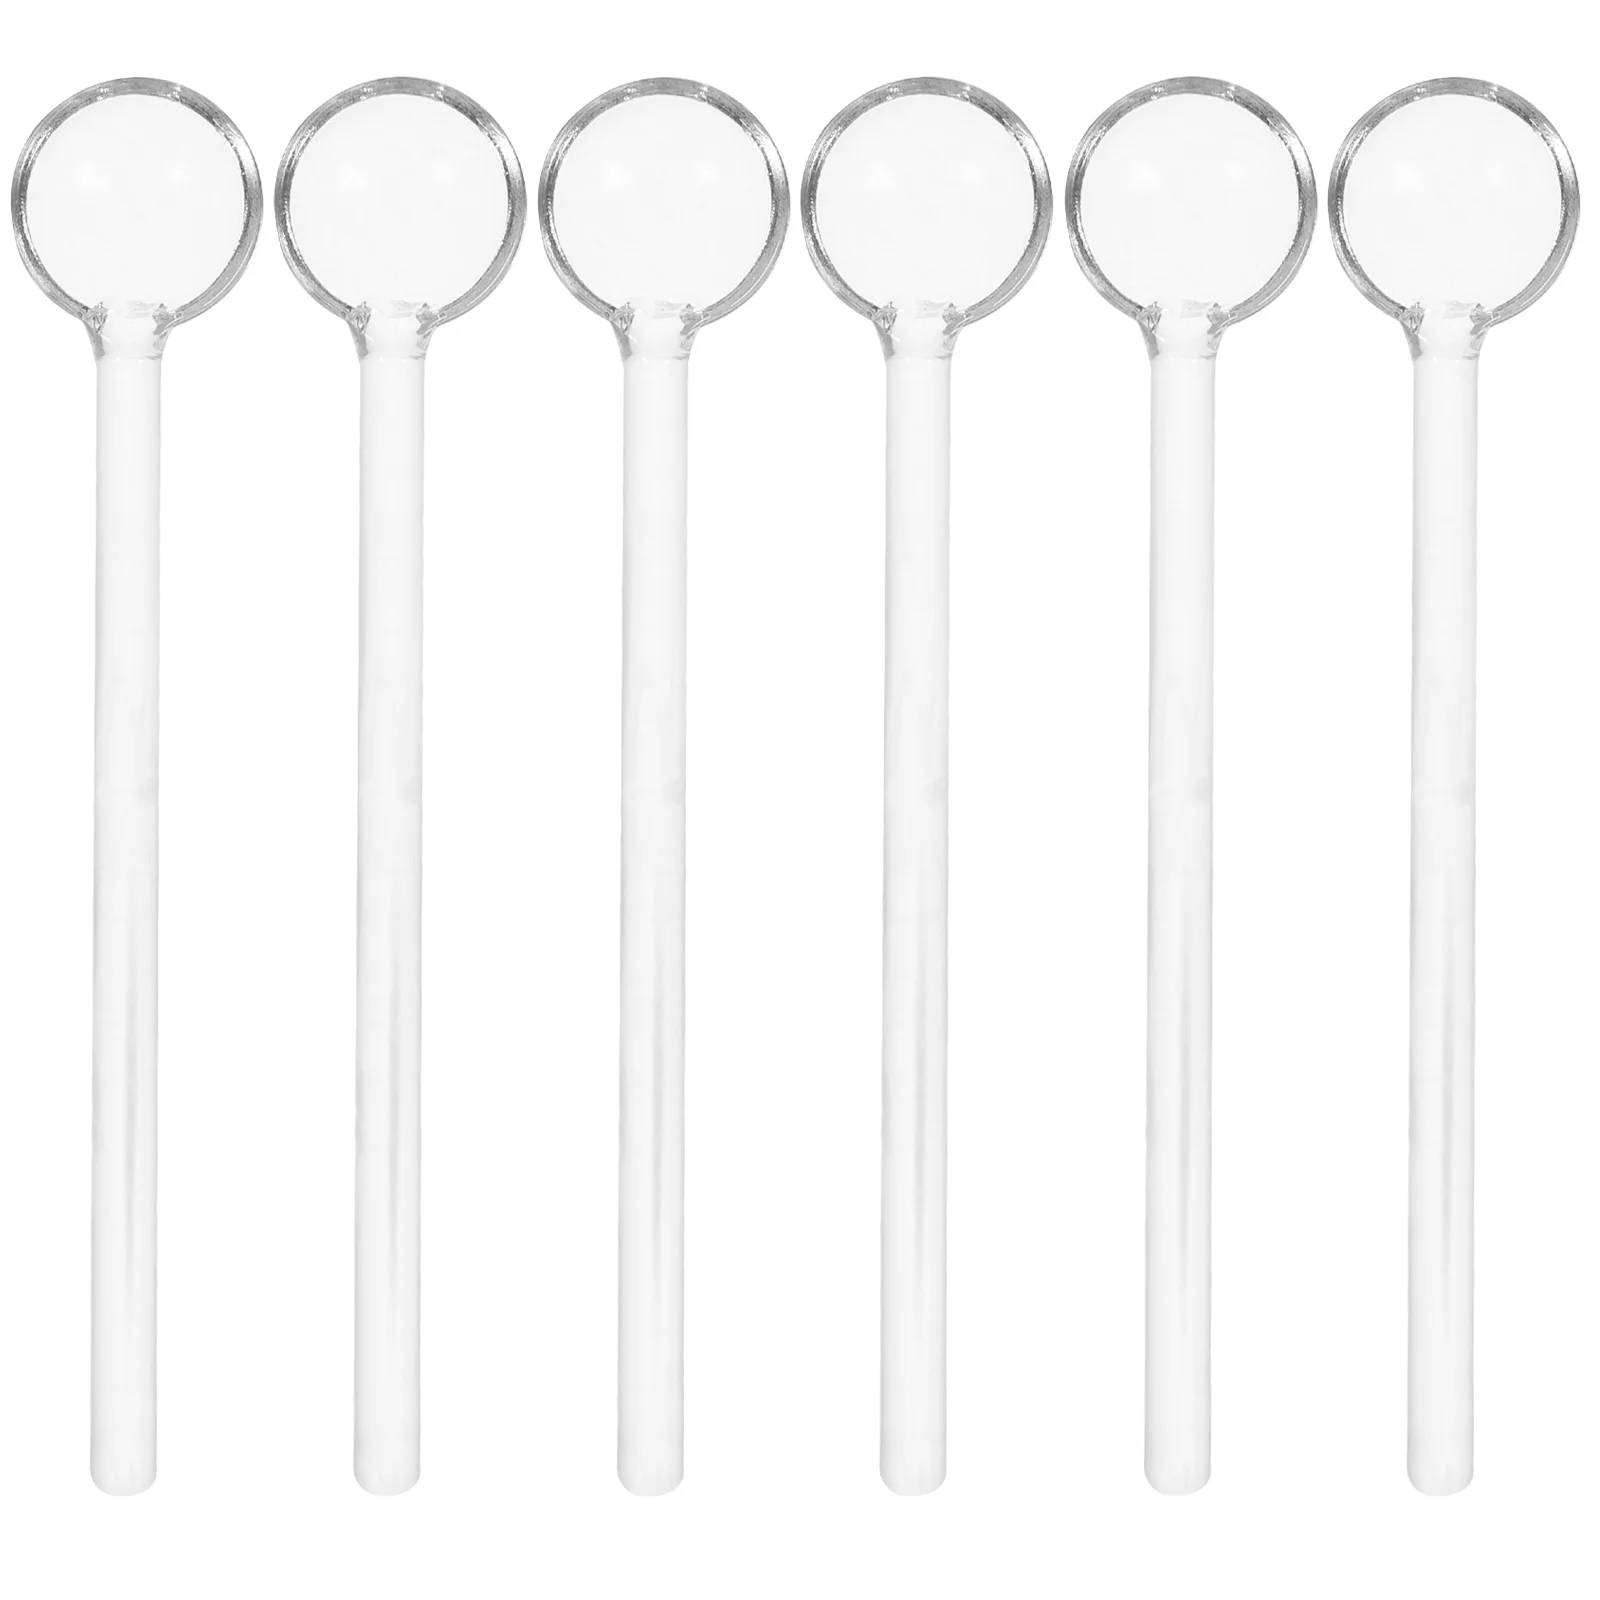 

Glass Spoon Spoons Tea Coffee Mixing Stirring Stirrers Ice Teaspoons Clearstirrer Rods Cocktaildessert Espresso Crystal Serving